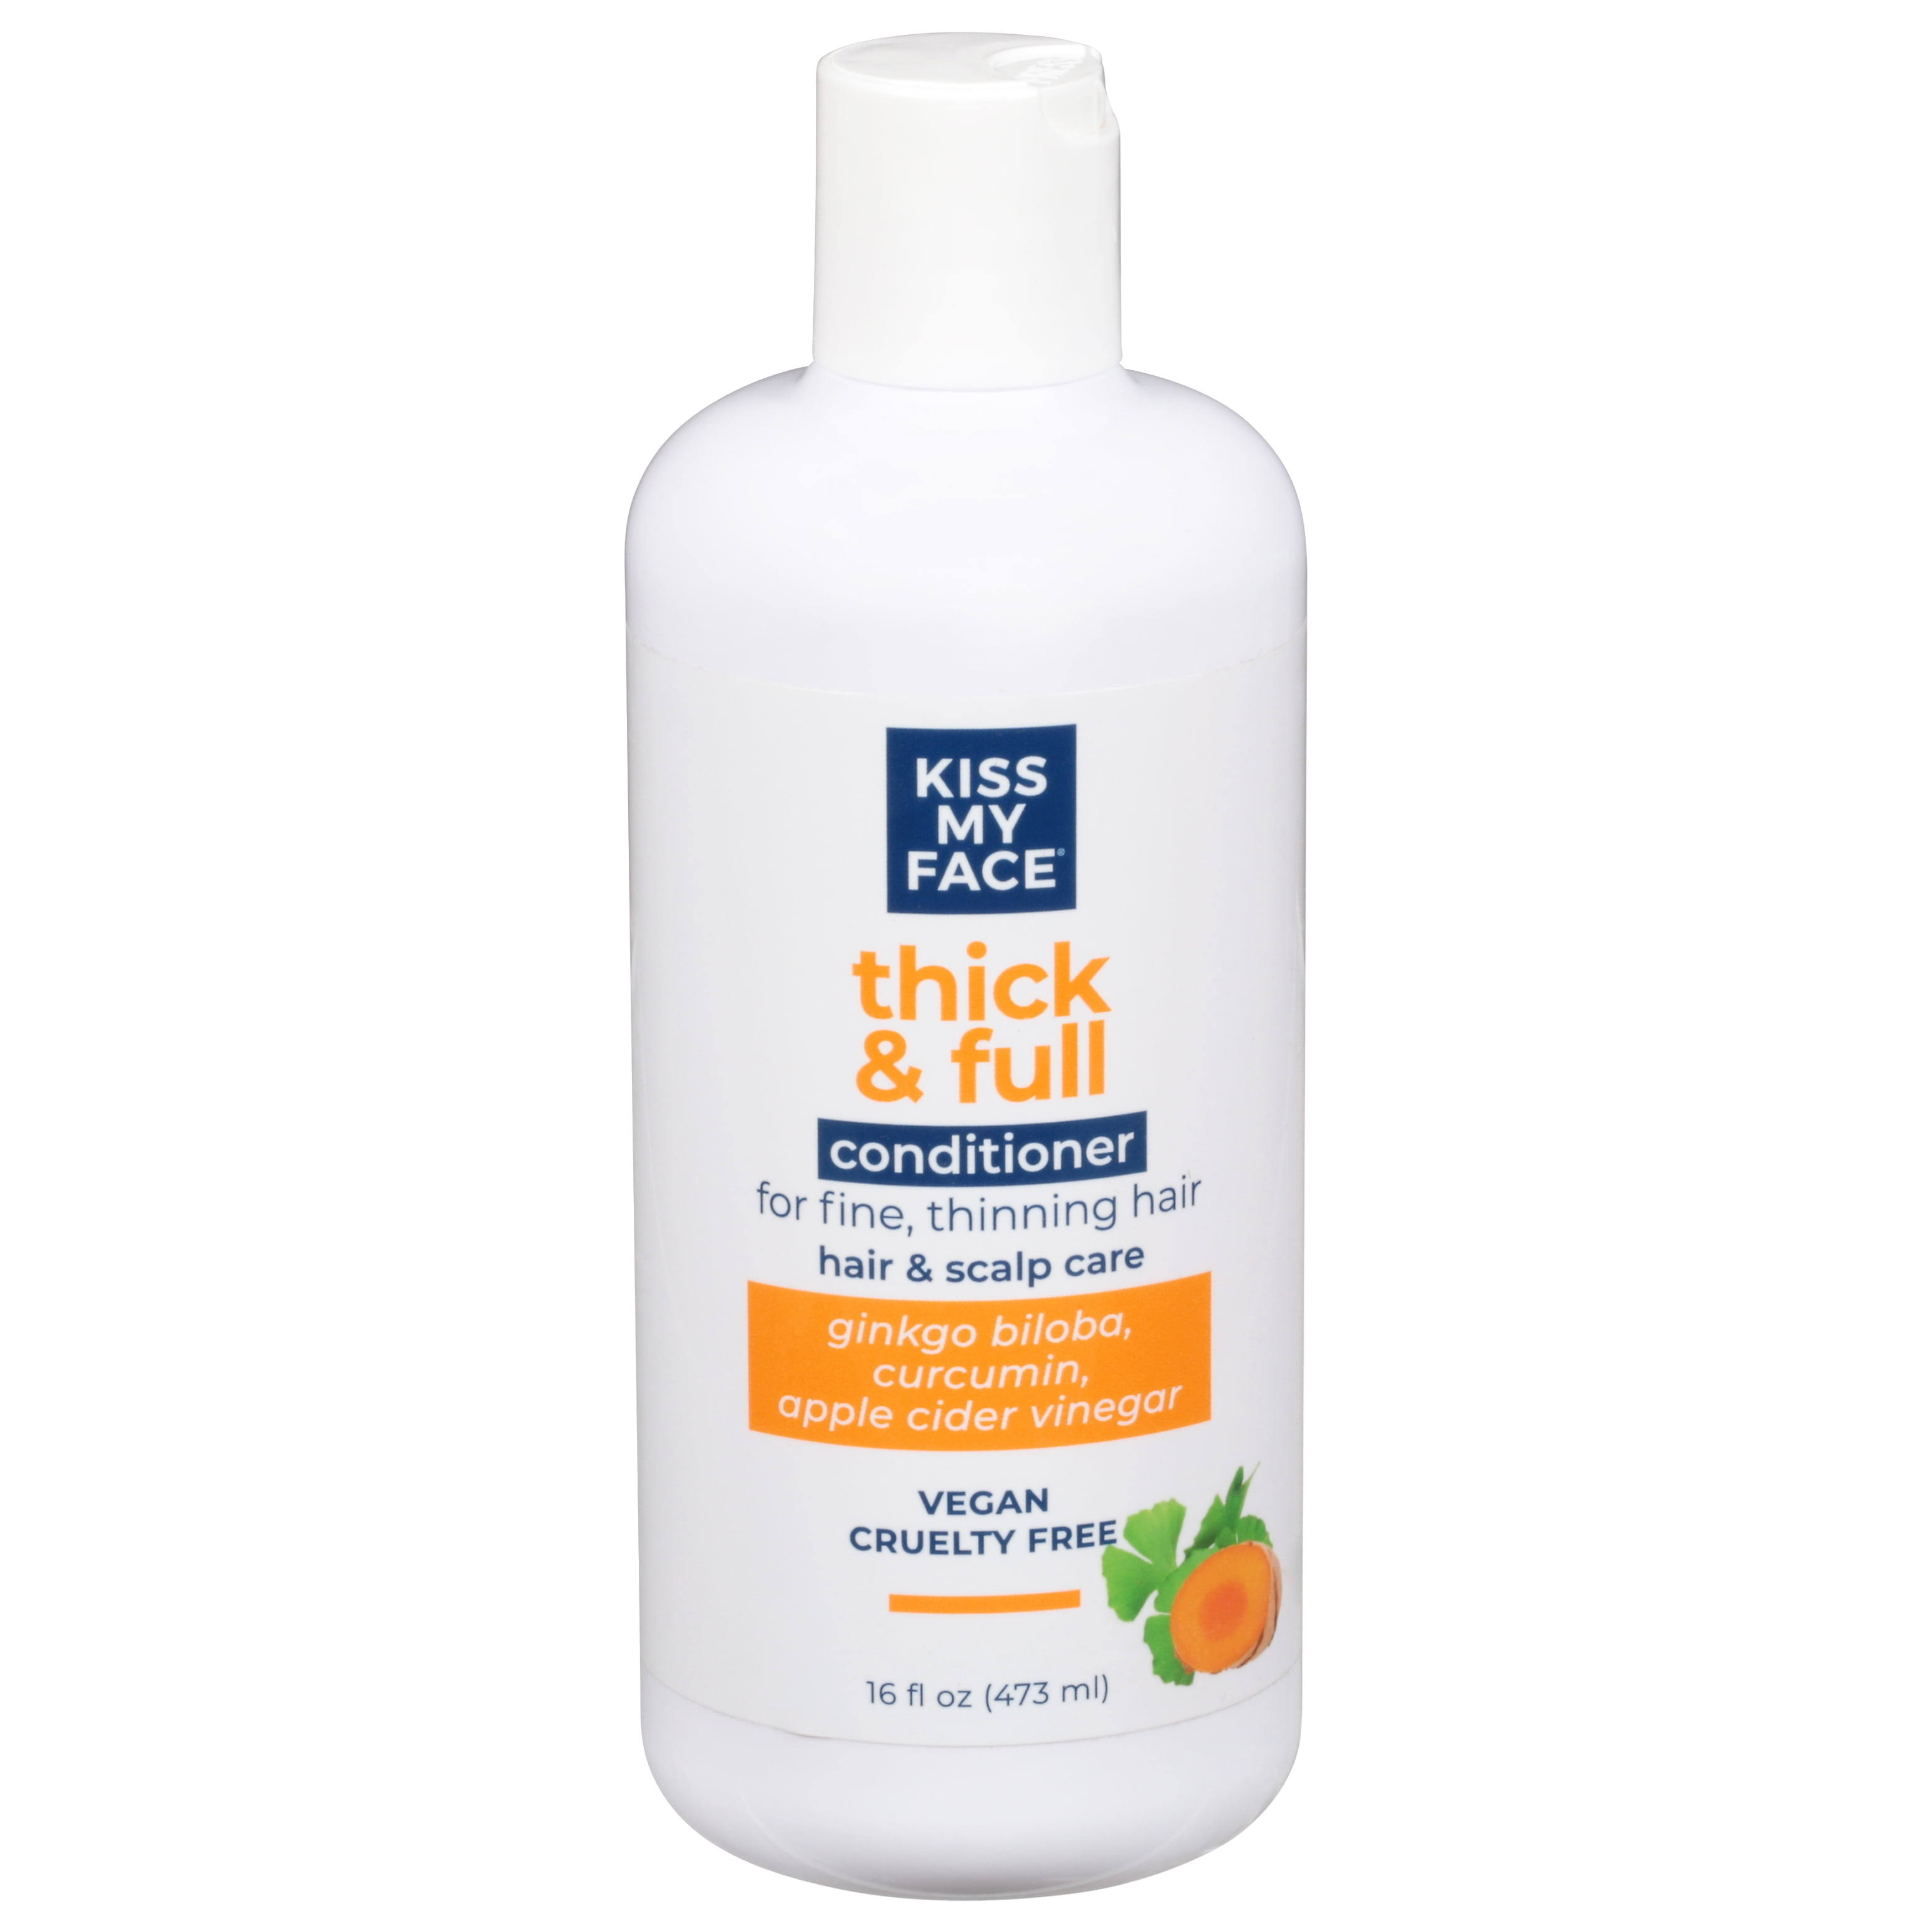 Kiss My Face Thick & Full Conditioner